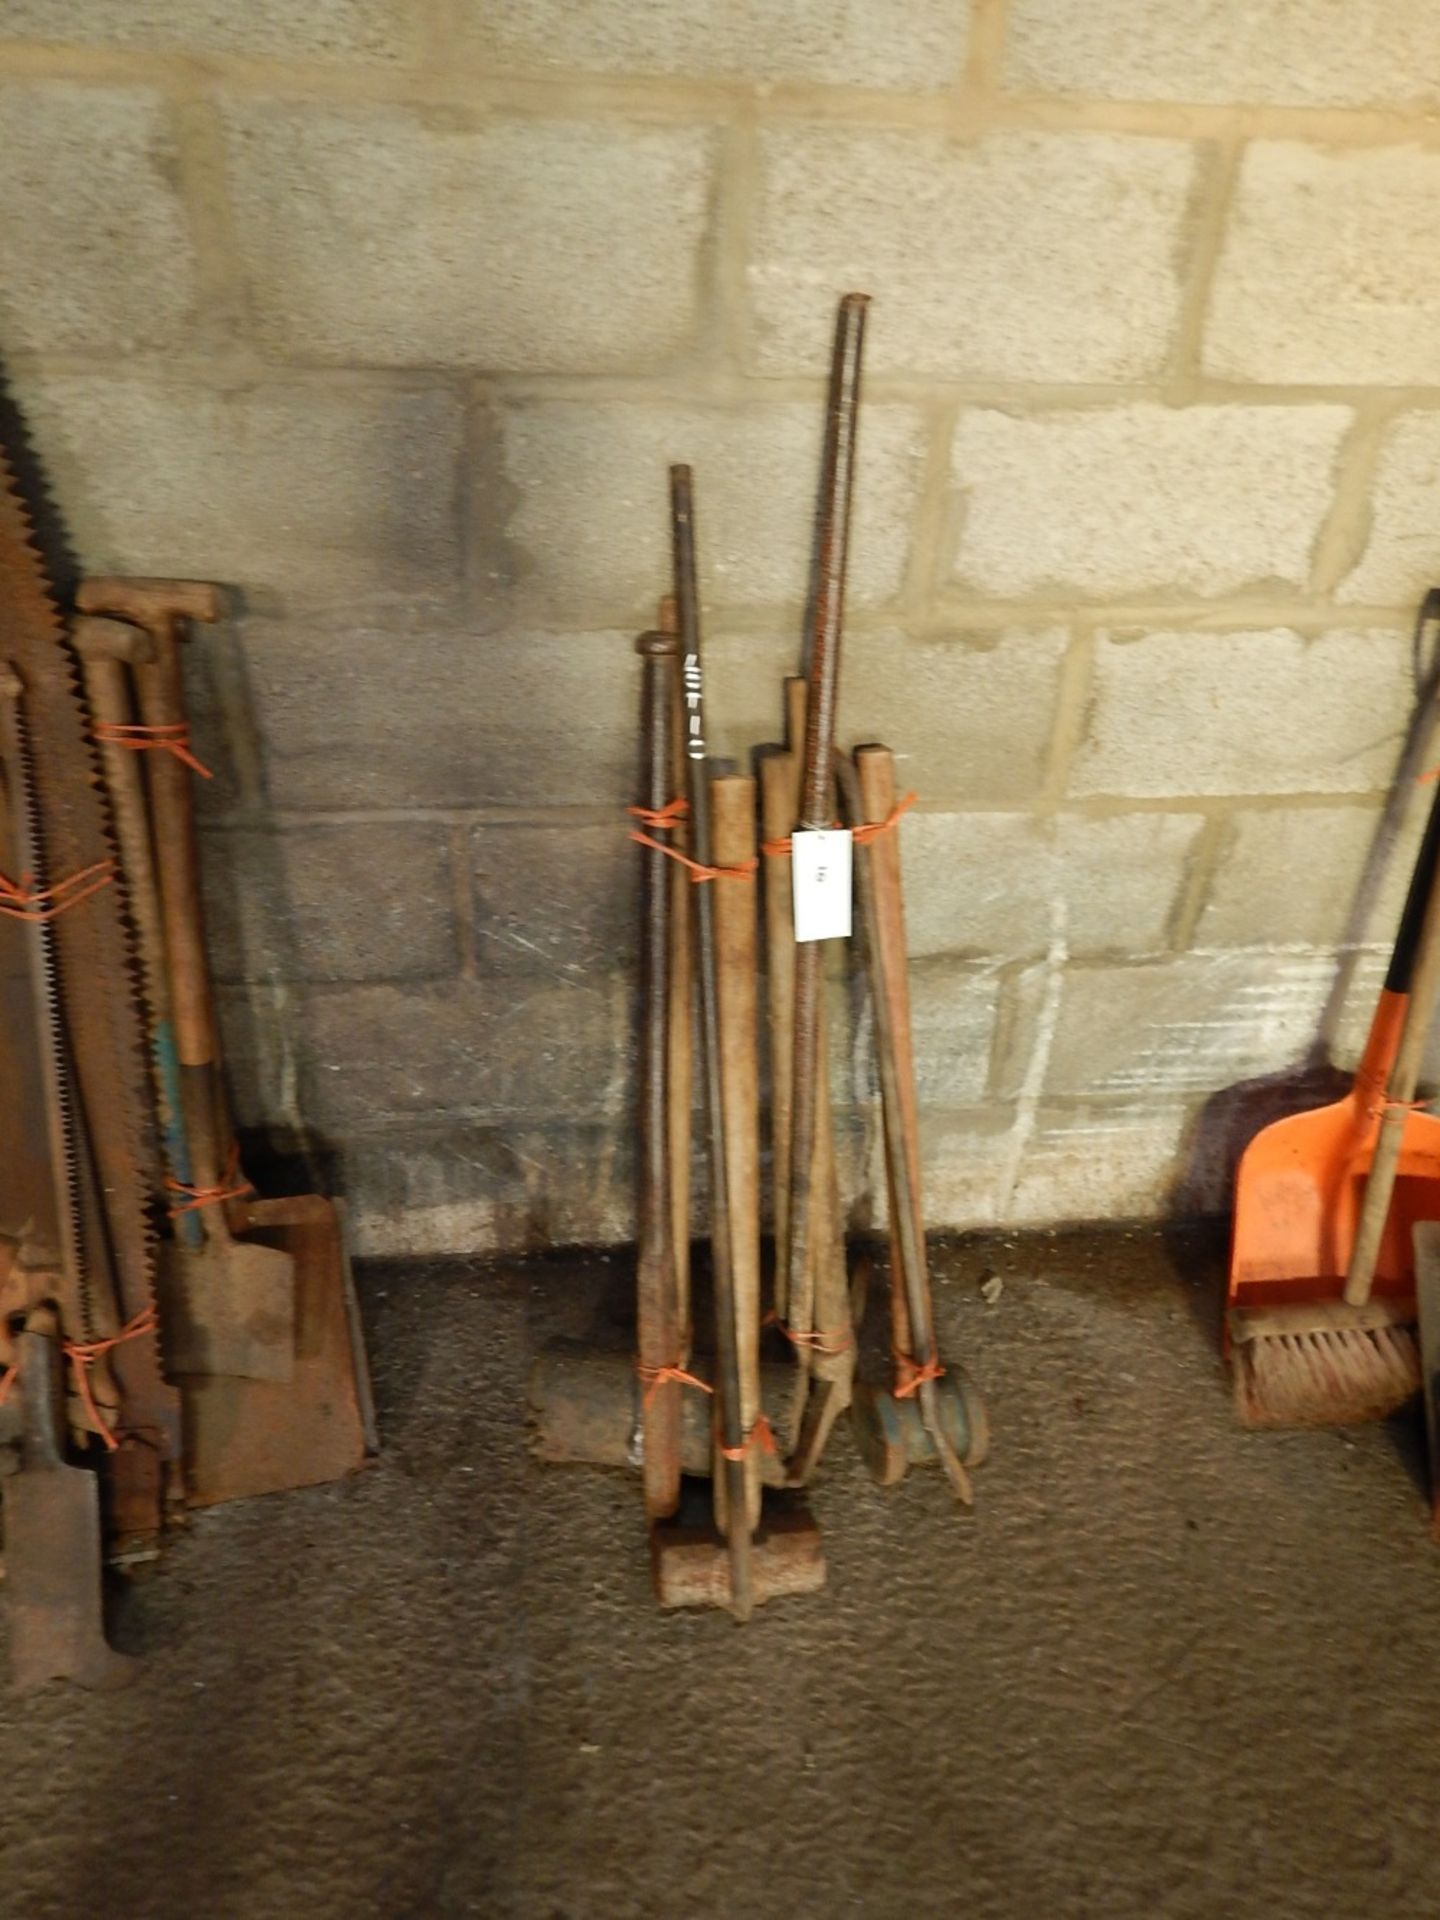 Qty sledge hammers, pick axes and bars etc